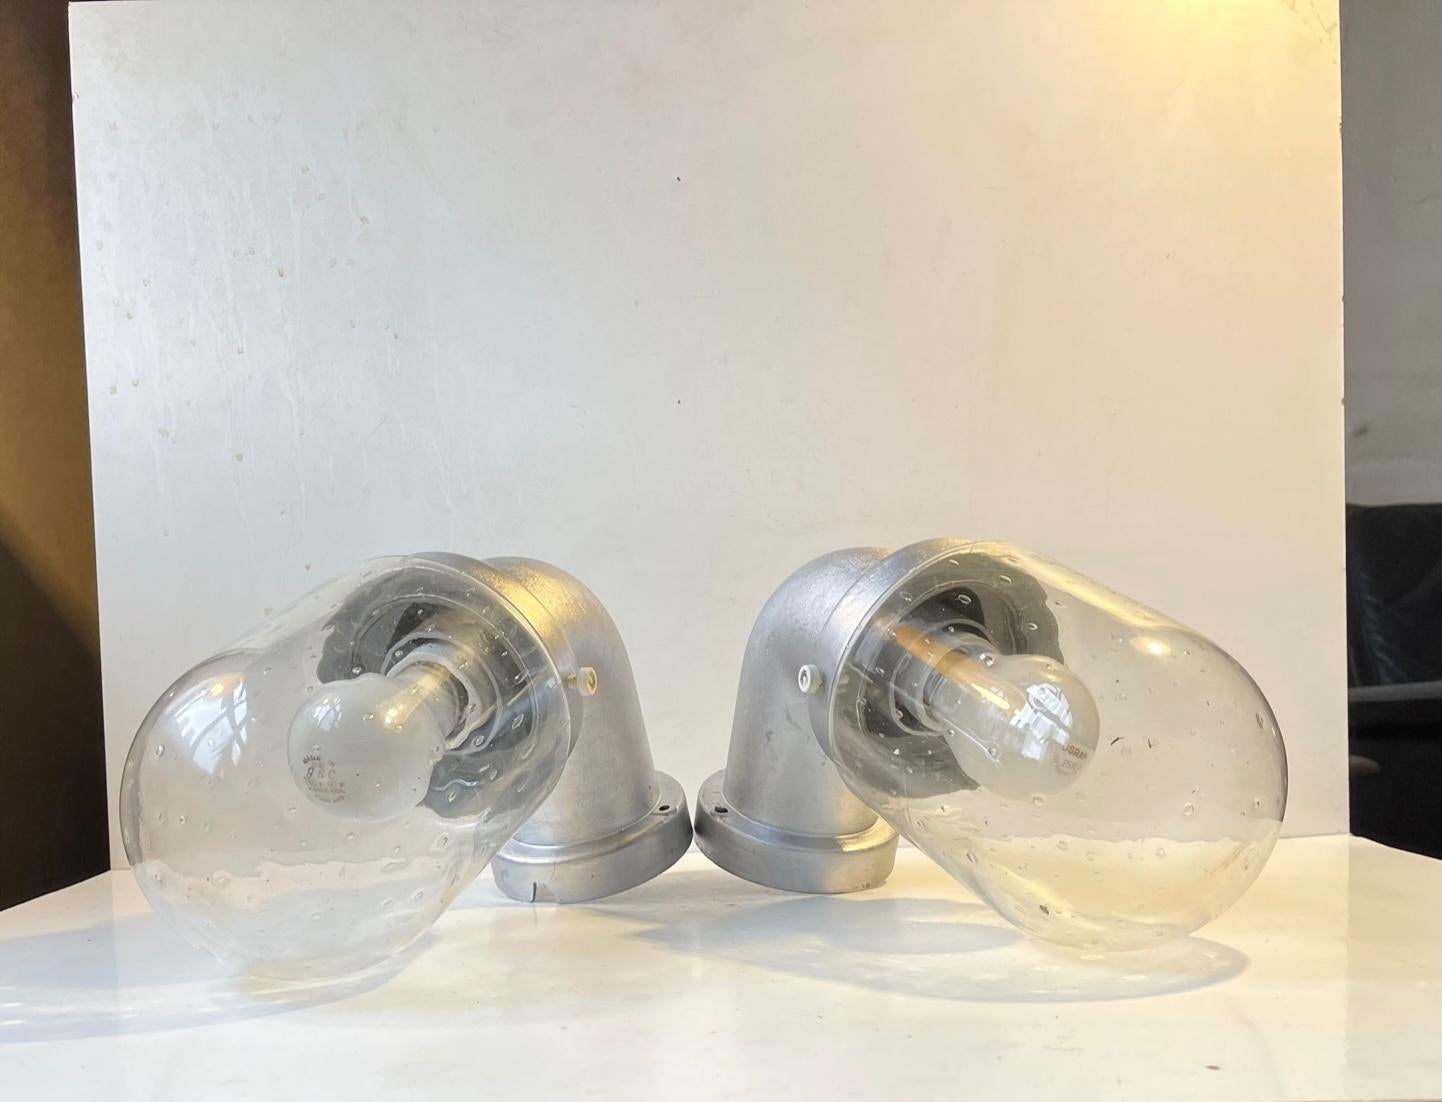 Industrial Outdoor Pipe Wall Sconces by LB Lyskær, Danish, 1970s In Good Condition For Sale In Esbjerg, DK